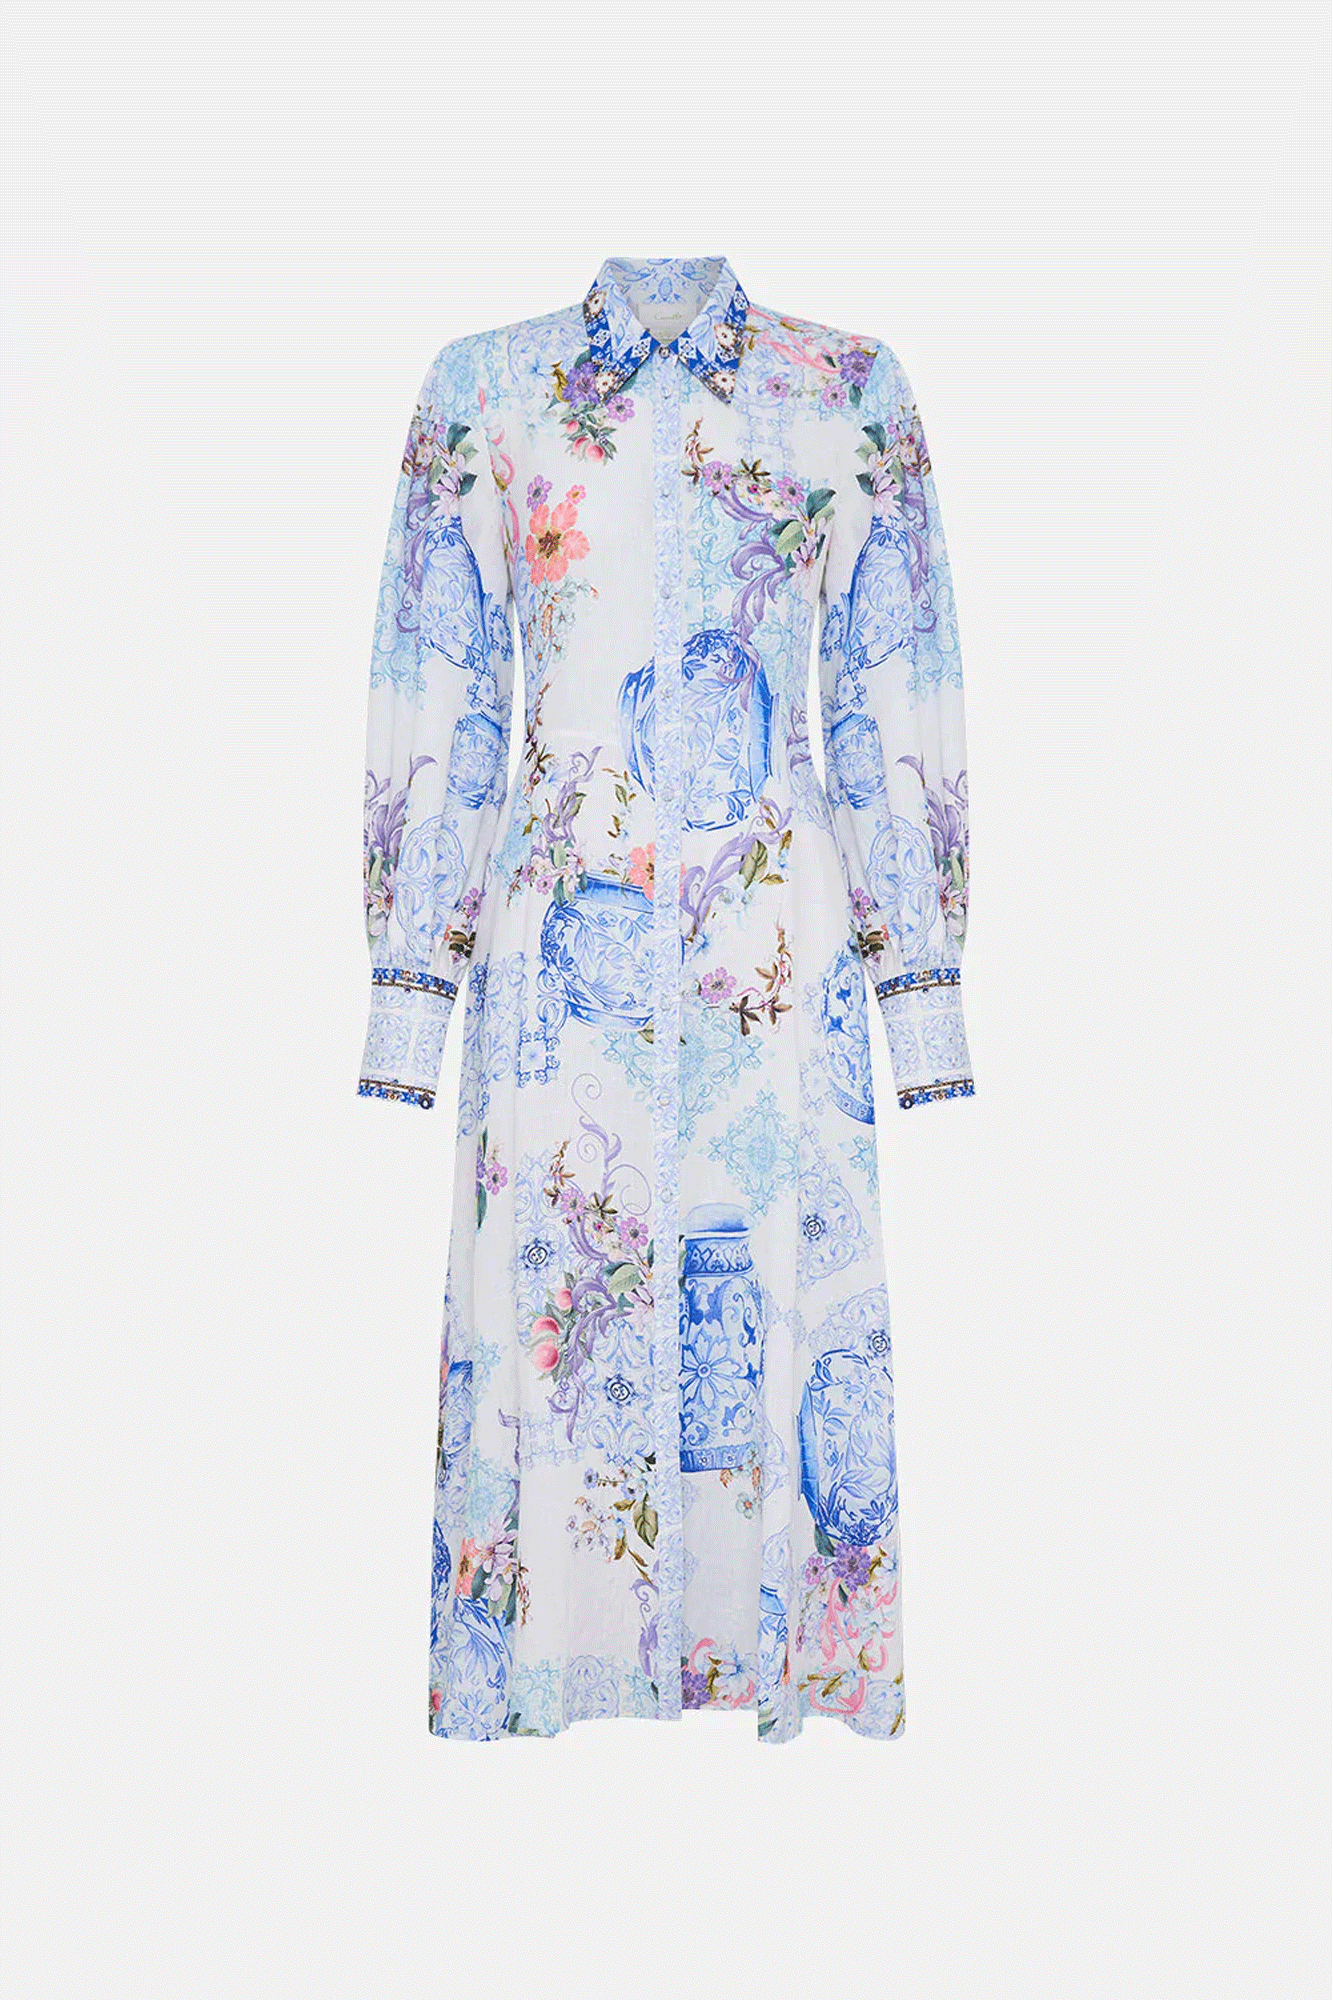 Elevate your wardrobe with this luxurious Waist Tie Shirt Dress from Camilla. It exudes an eye-catching aesthetic of intricate tile mosaics, delicate pastel florals, and a striking full-length silhouette.